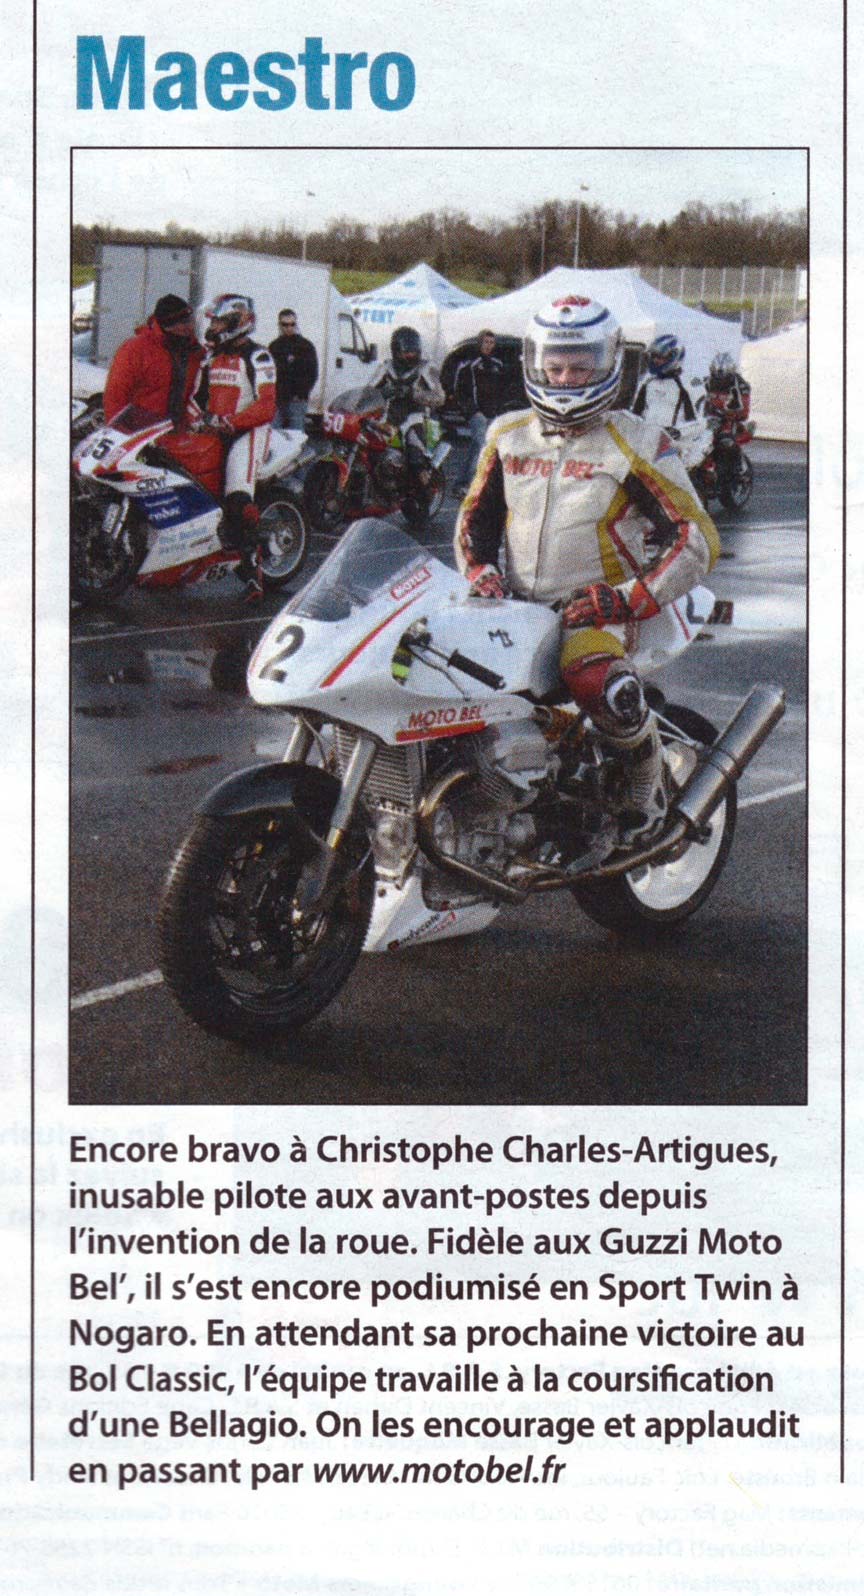 Young Timers 9 - Charles-Artigues en SporTwin